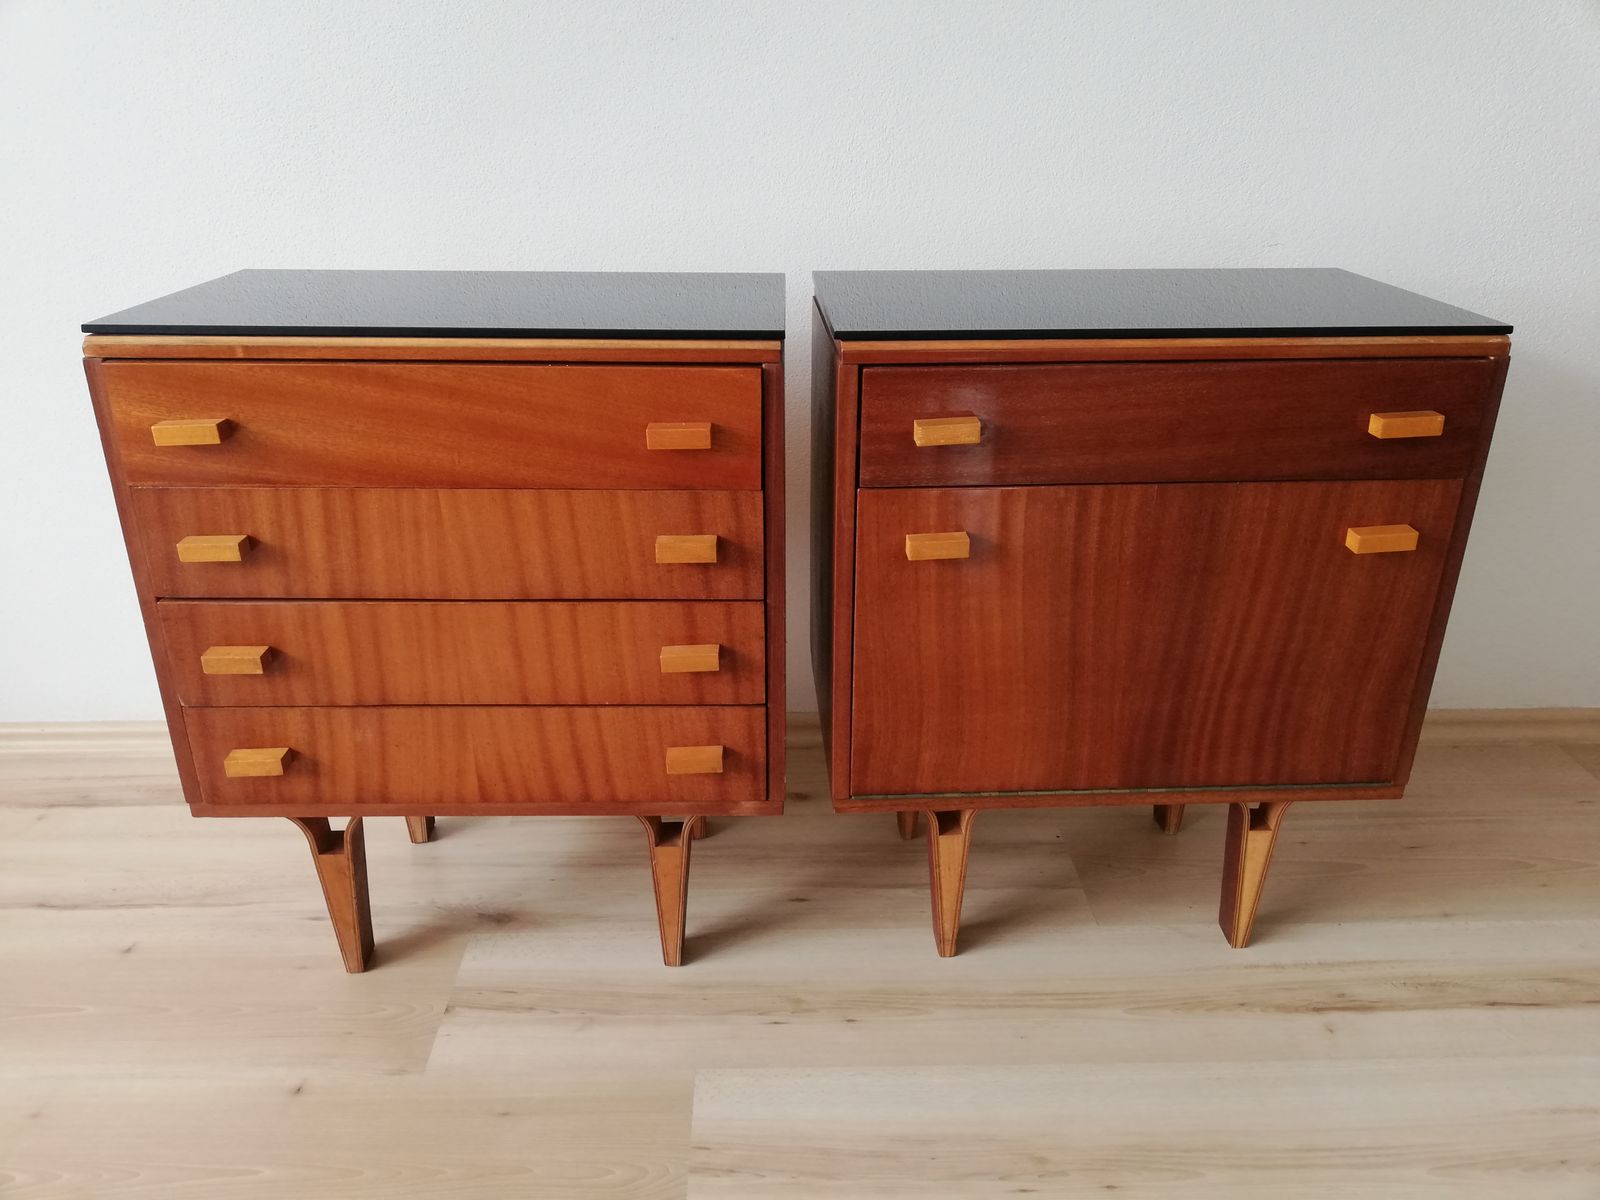 Mahogany Nightstands With Opaxit Glass By Frantisek Jirak For Novy